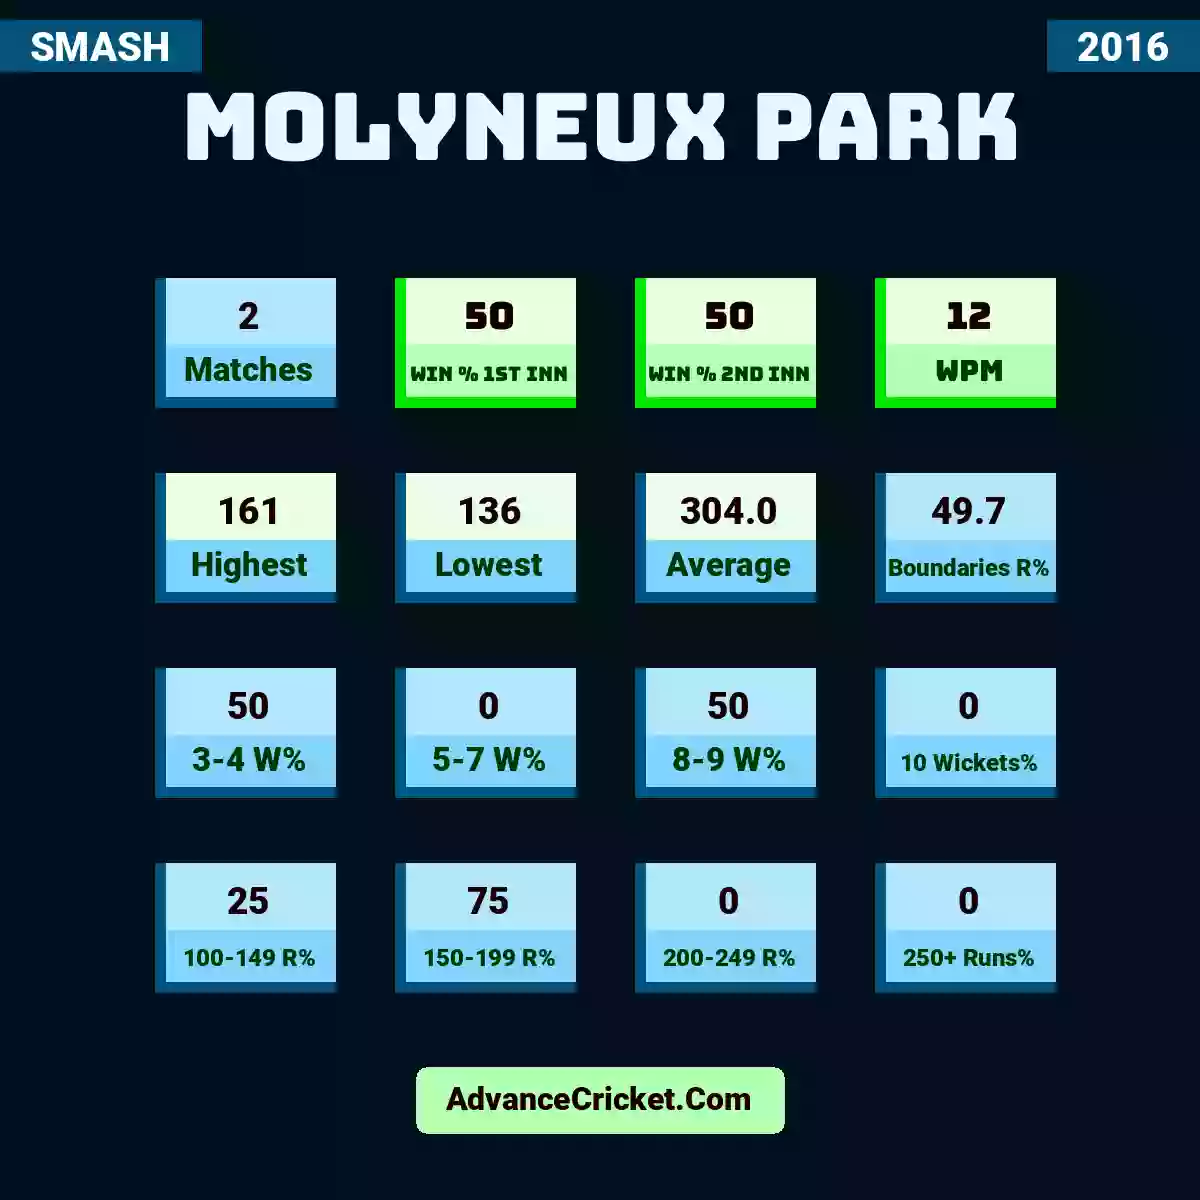 Image showing Molyneux Park with Matches: 2, Win % 1st Inn: 50, Win % 2nd Inn: 50, WPM: 12, Highest: 161, Lowest: 136, Average: 304.0, Boundaries R%: 49.7, 3-4 W%: 50, 5-7 W%: 0, 8-9 W%: 50, 10 Wickets%: 0, 100-149 R%: 25, 150-199 R%: 75, 200-249 R%: 0, 250+ Runs%: 0.